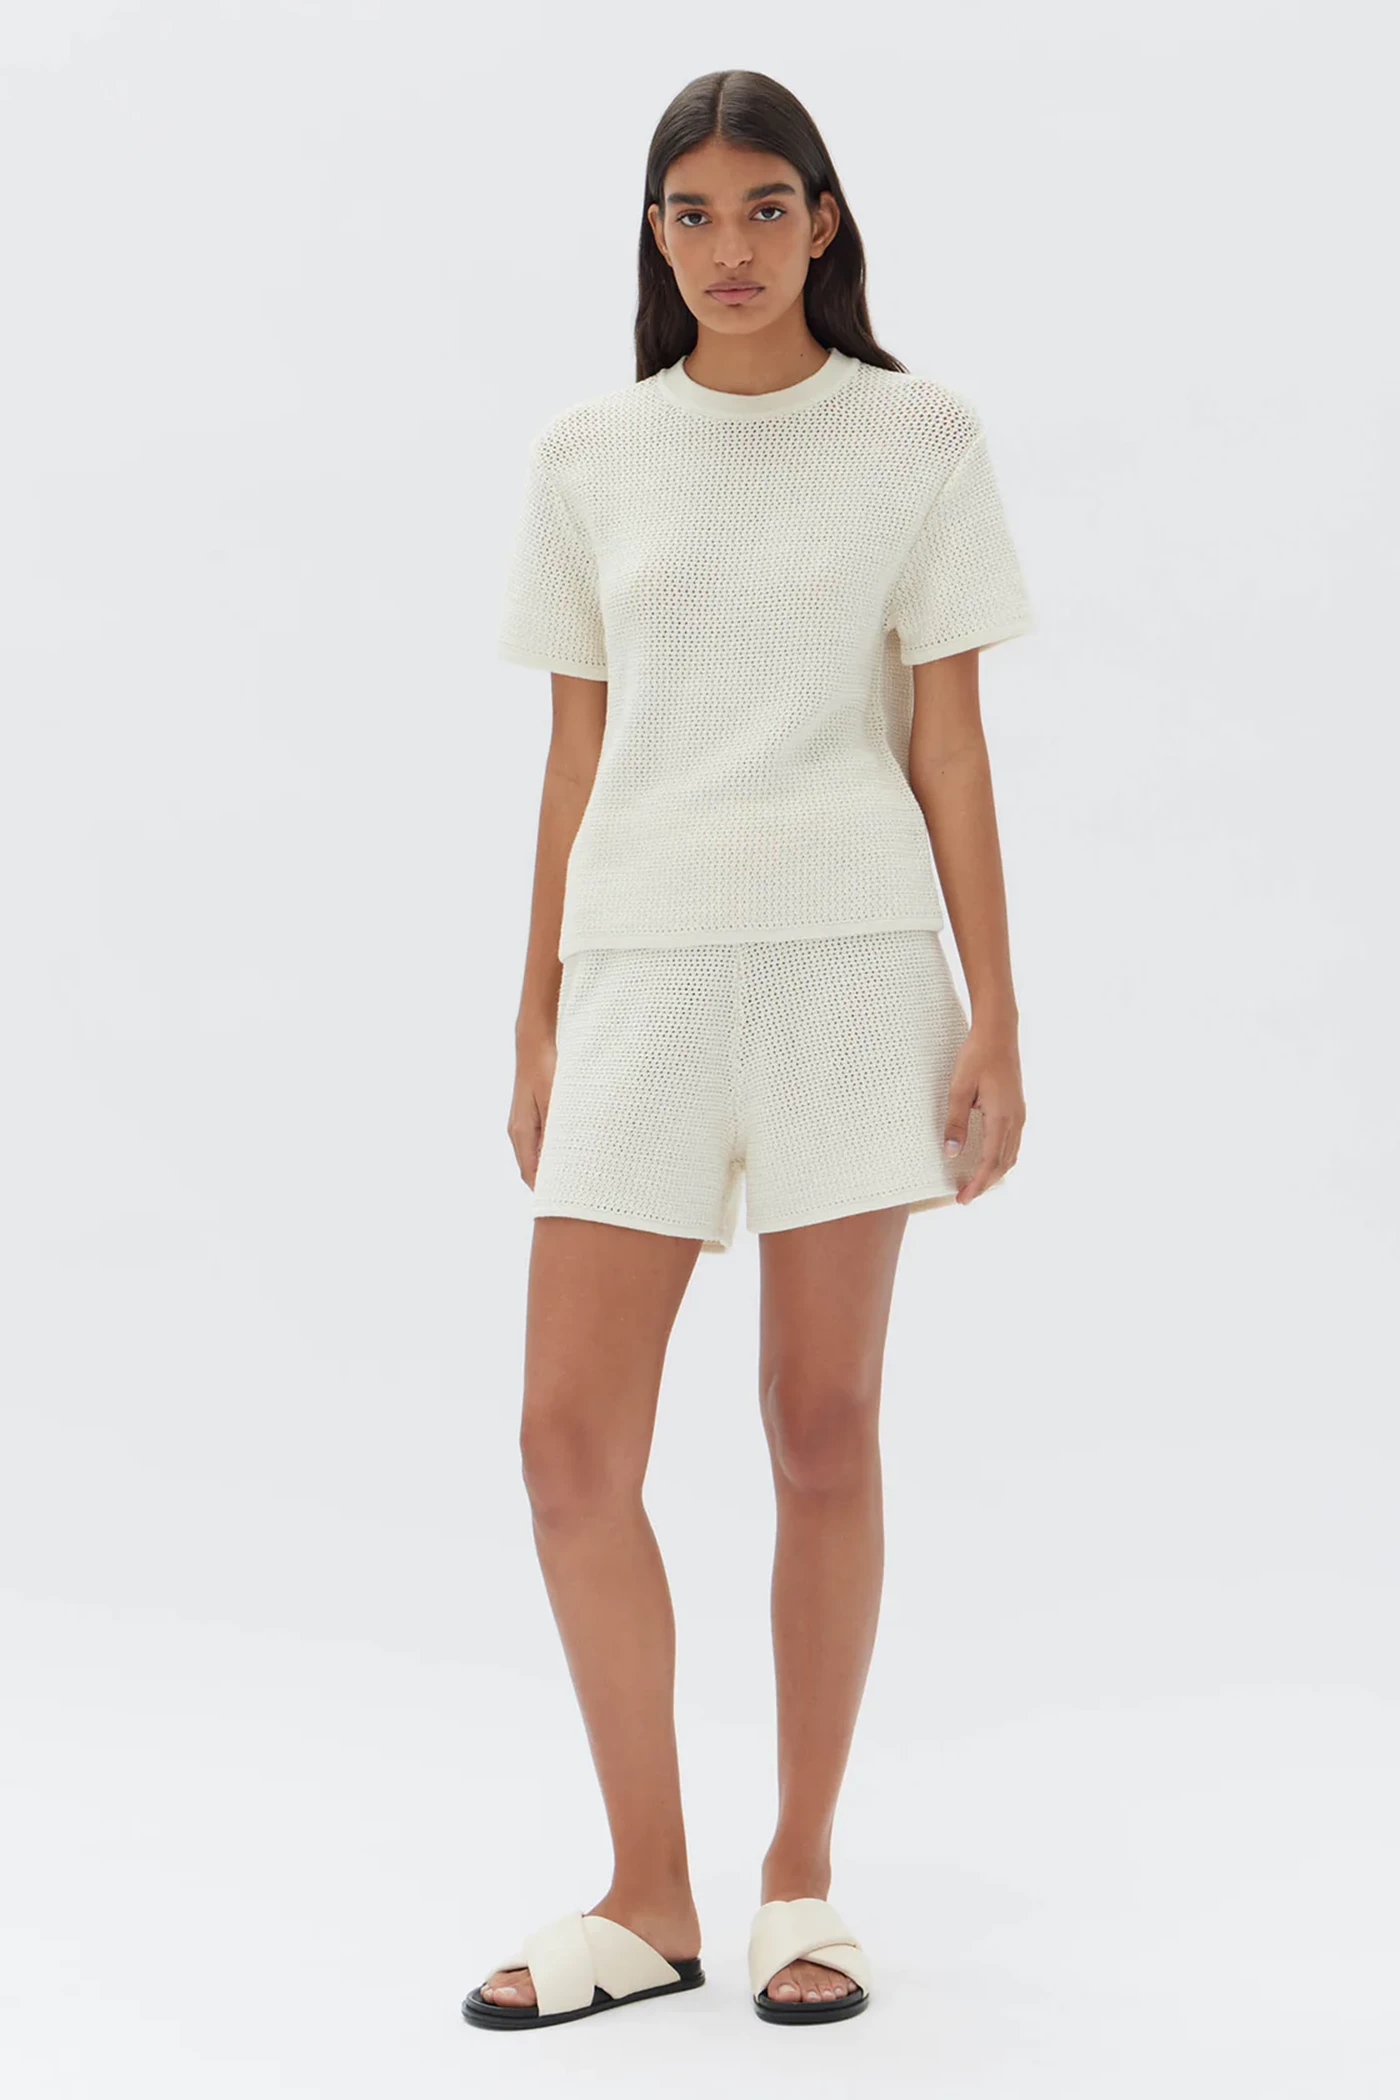 A woman wears a white crochet set in shorts and a T-shirt by the Assembly Label.